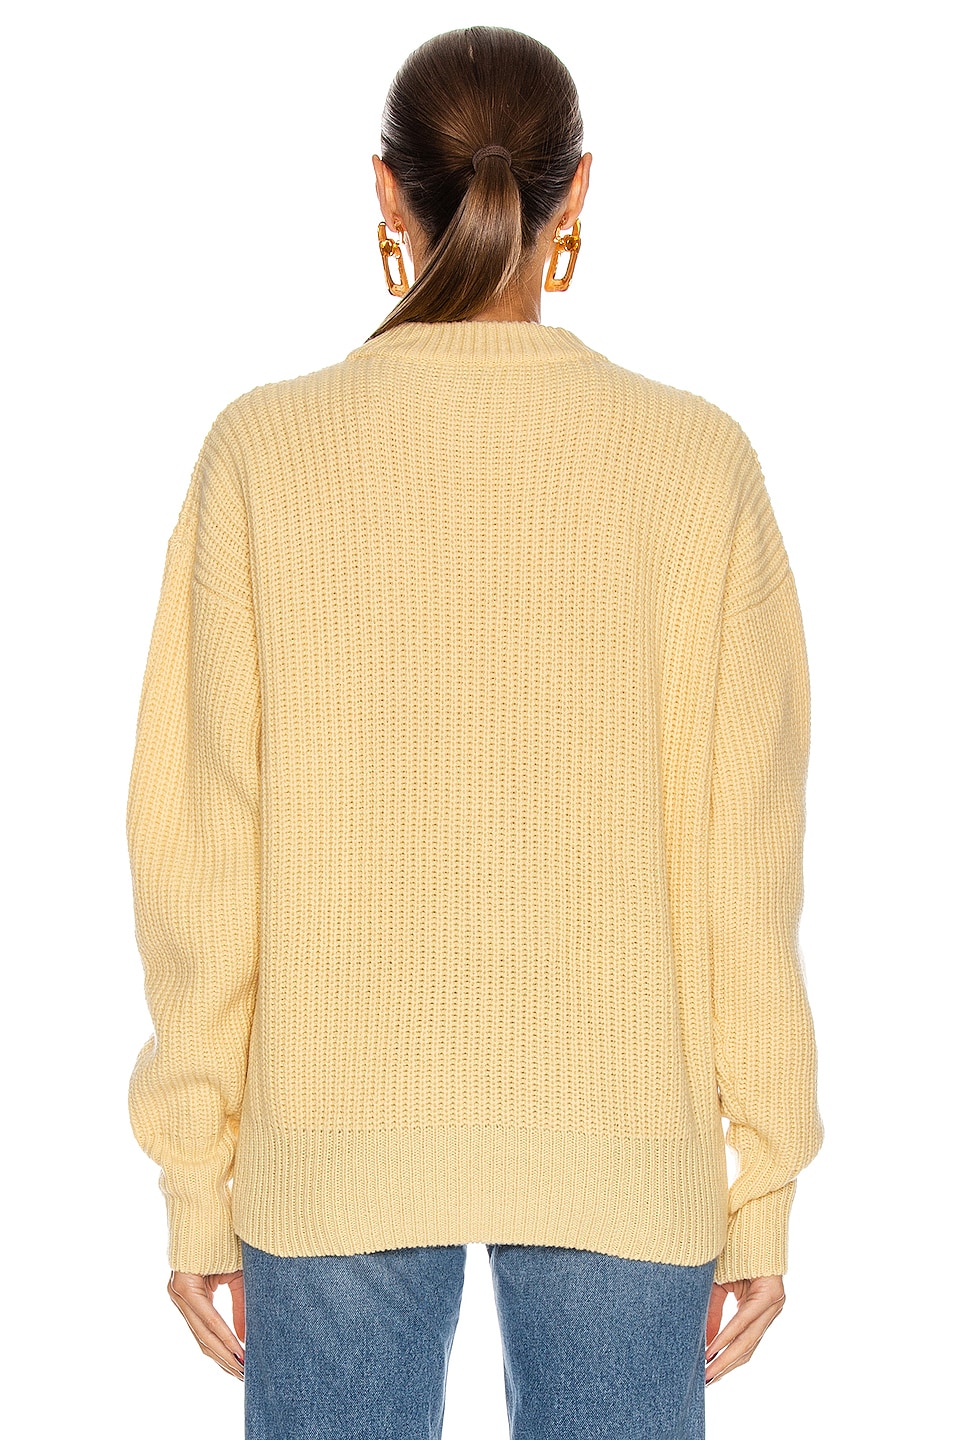 THE ATTICO Ribbed Sweater in Pale Yellow | FWRD